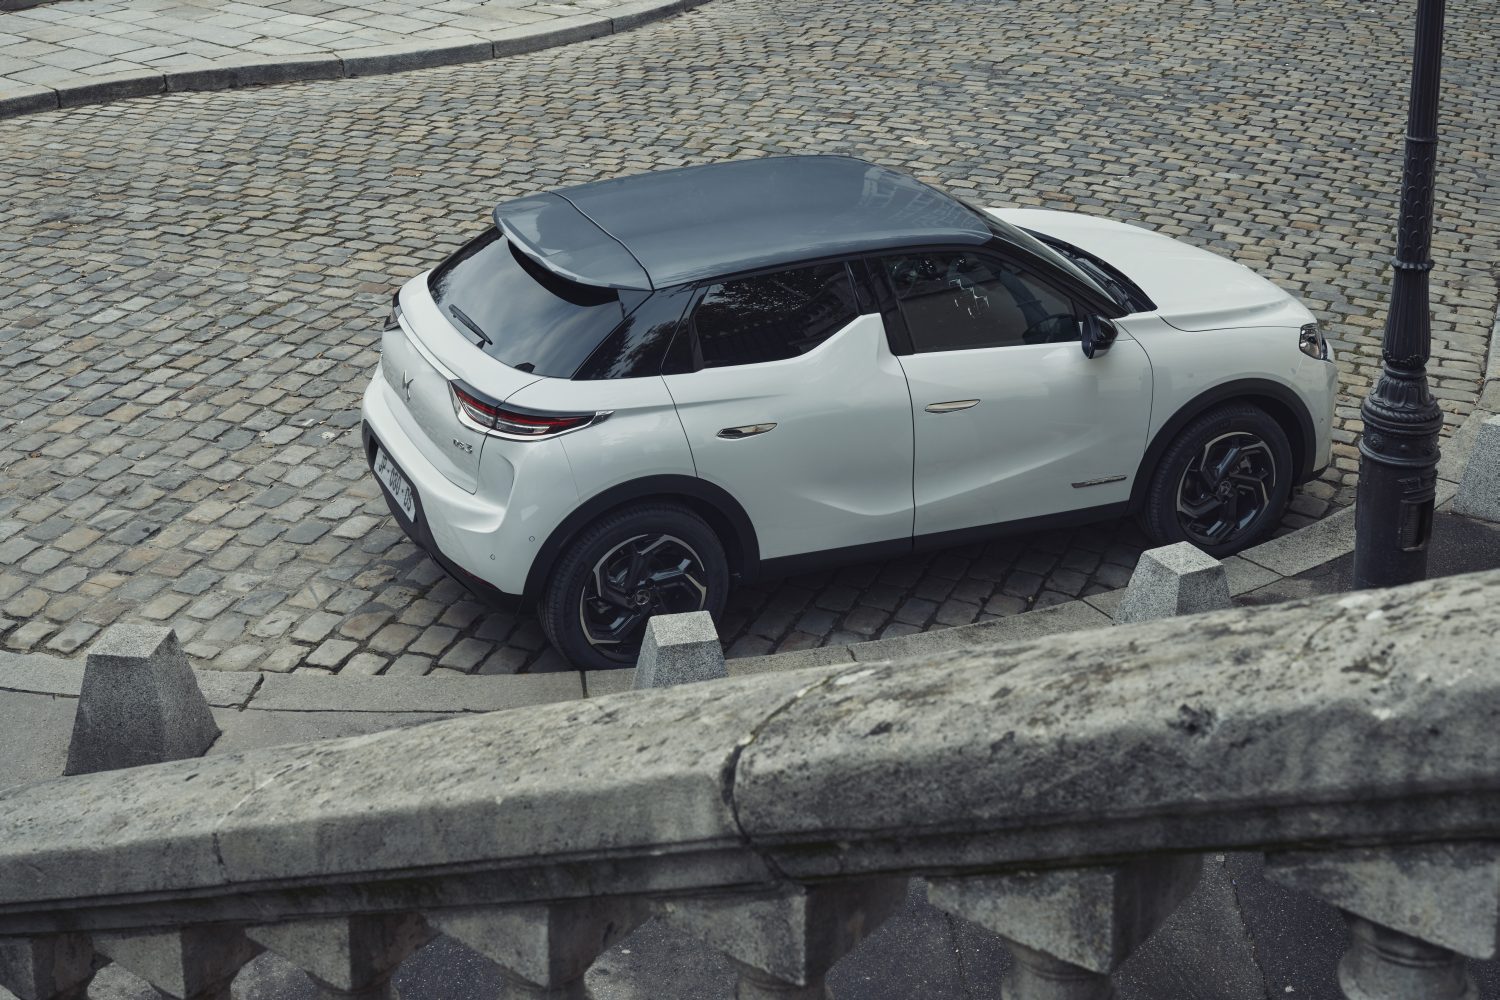 DS 3 Crossback "Roof of Paris", here the prices for Spain